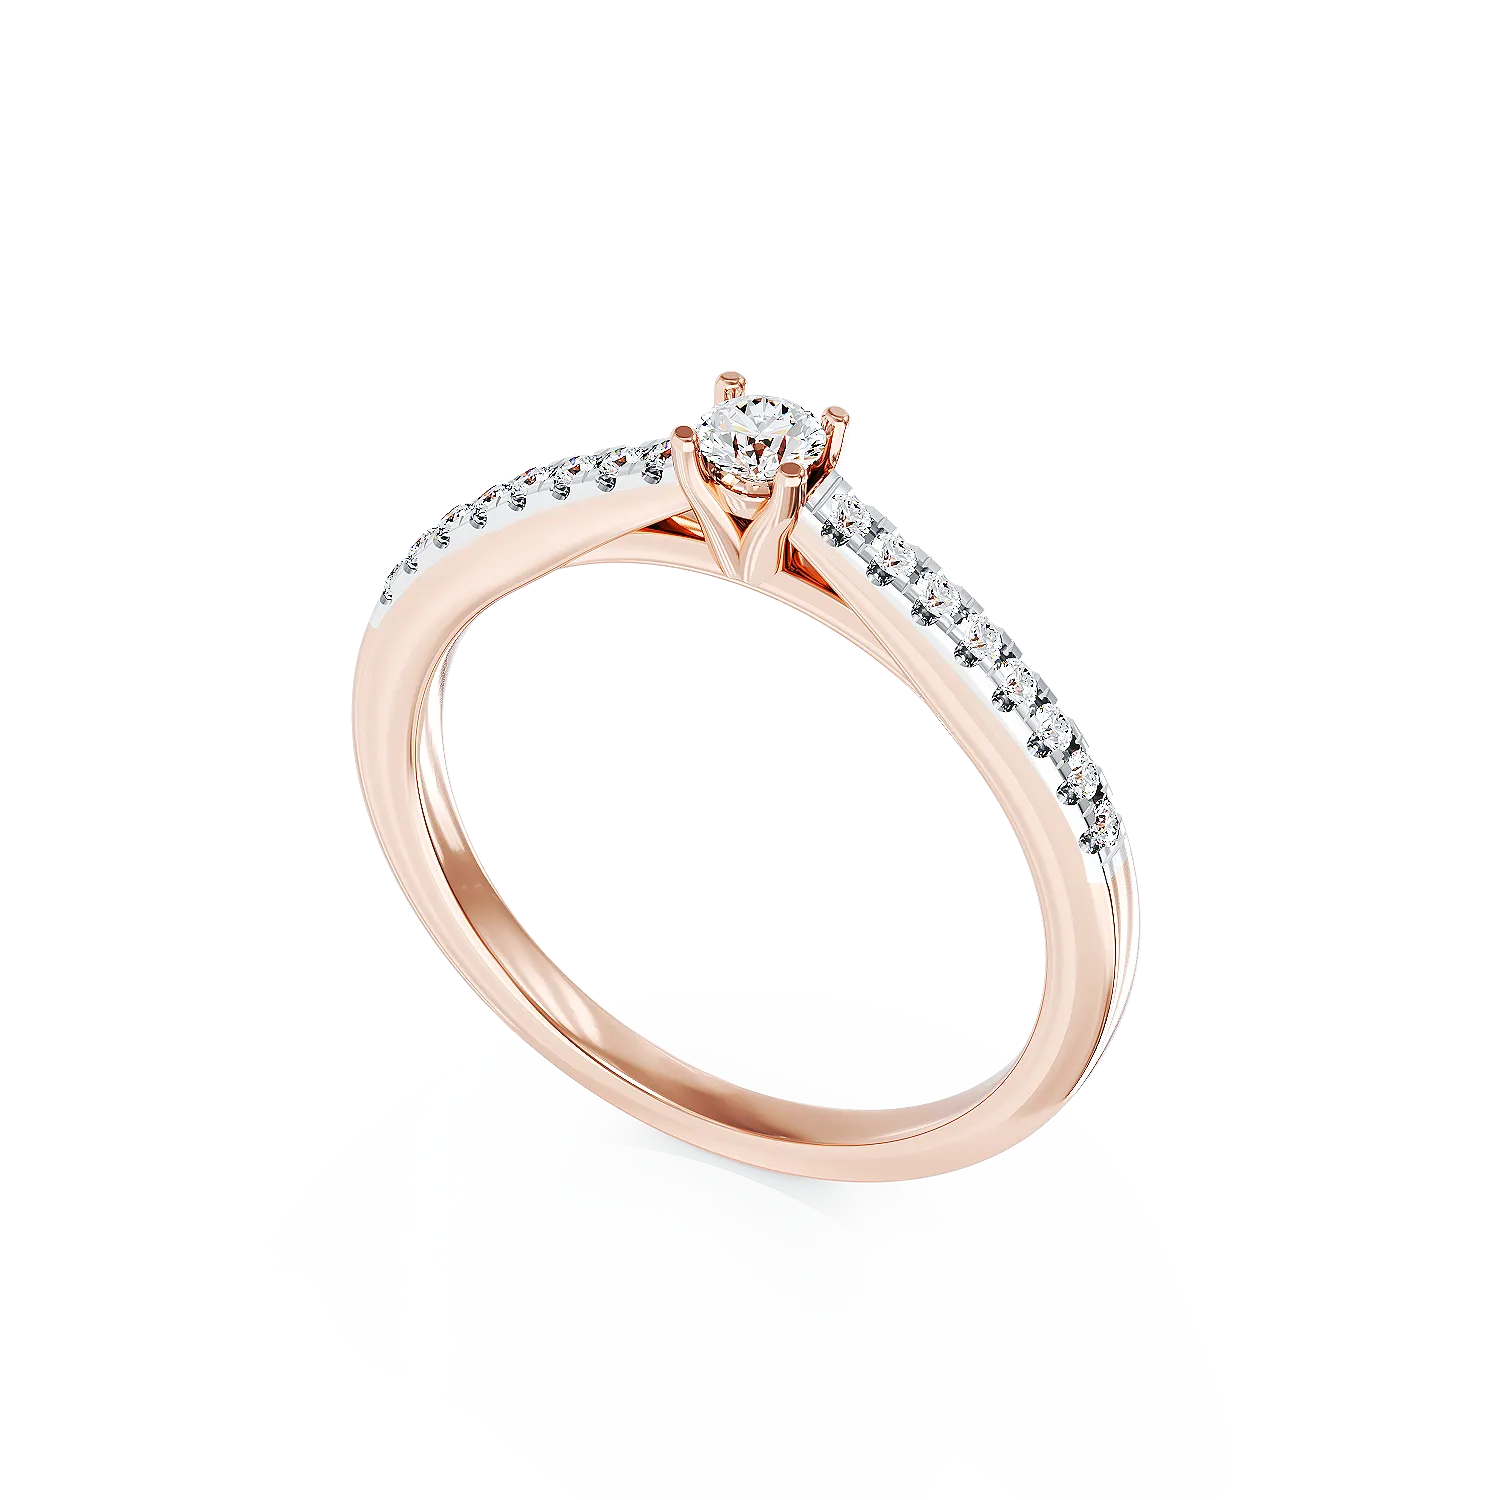 18K rose gold engagement ring with 0.2ct diamond and 0.185ct diamonds